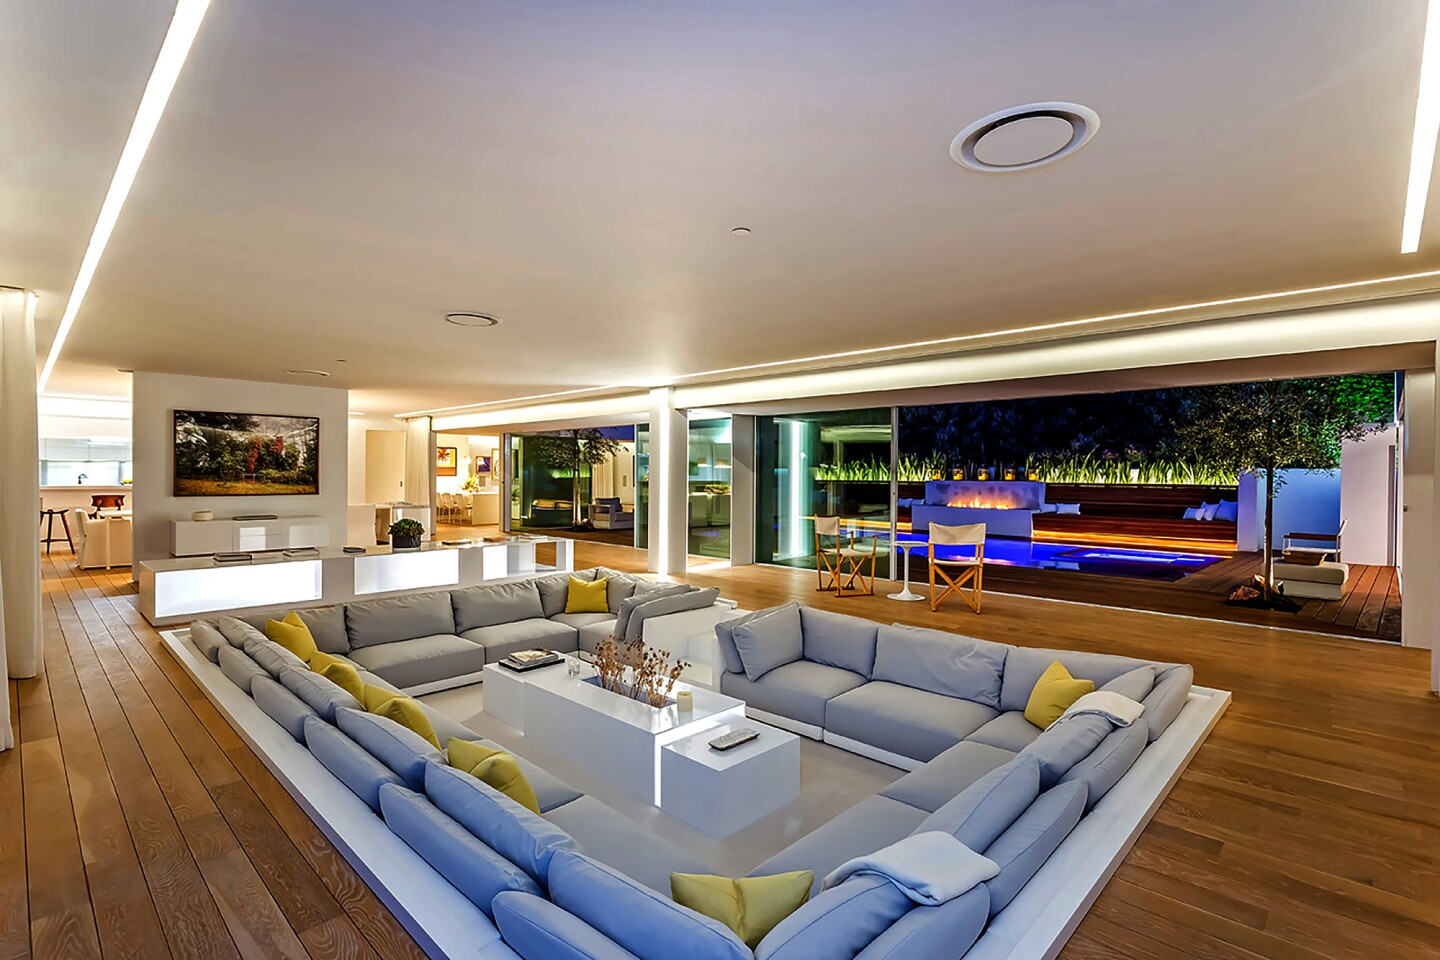 The single-story house, built in 1960, evokes a Miami night club with an all-white interior, a sunken conversation pit and custom LED lighting.